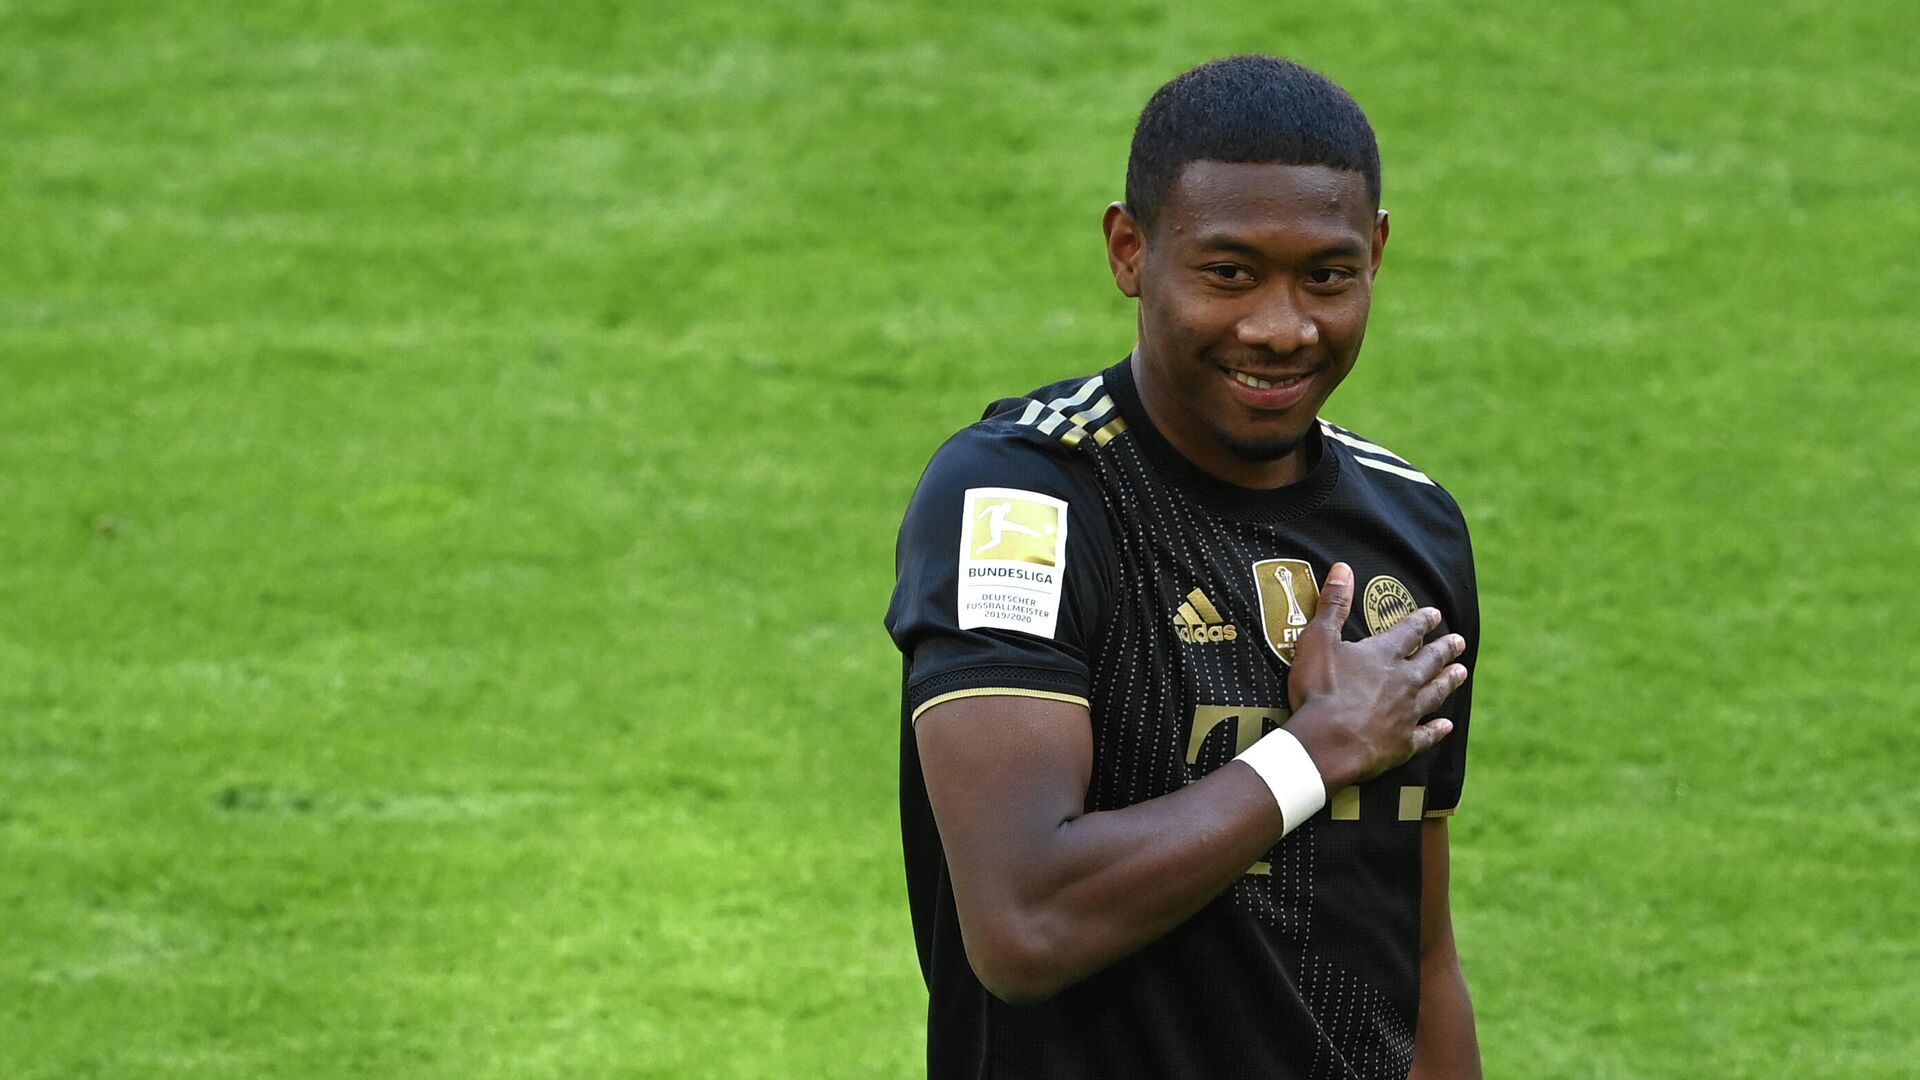 Bayern Munich's Austrian defender David Alaba gestures prior the German first division Bundesliga football match Bayern Munich vs FC Augsburg in Munich, southern Germany, on May 22, 2021. (Photo by CHRISTOF STACHE / POOL / AFP) / DFL REGULATIONS PROHIBIT ANY USE OF PHOTOGRAPHS AS IMAGE SEQUENCES AND/OR QUASI-VIDEO - РИА Новости, 1920, 28.05.2021